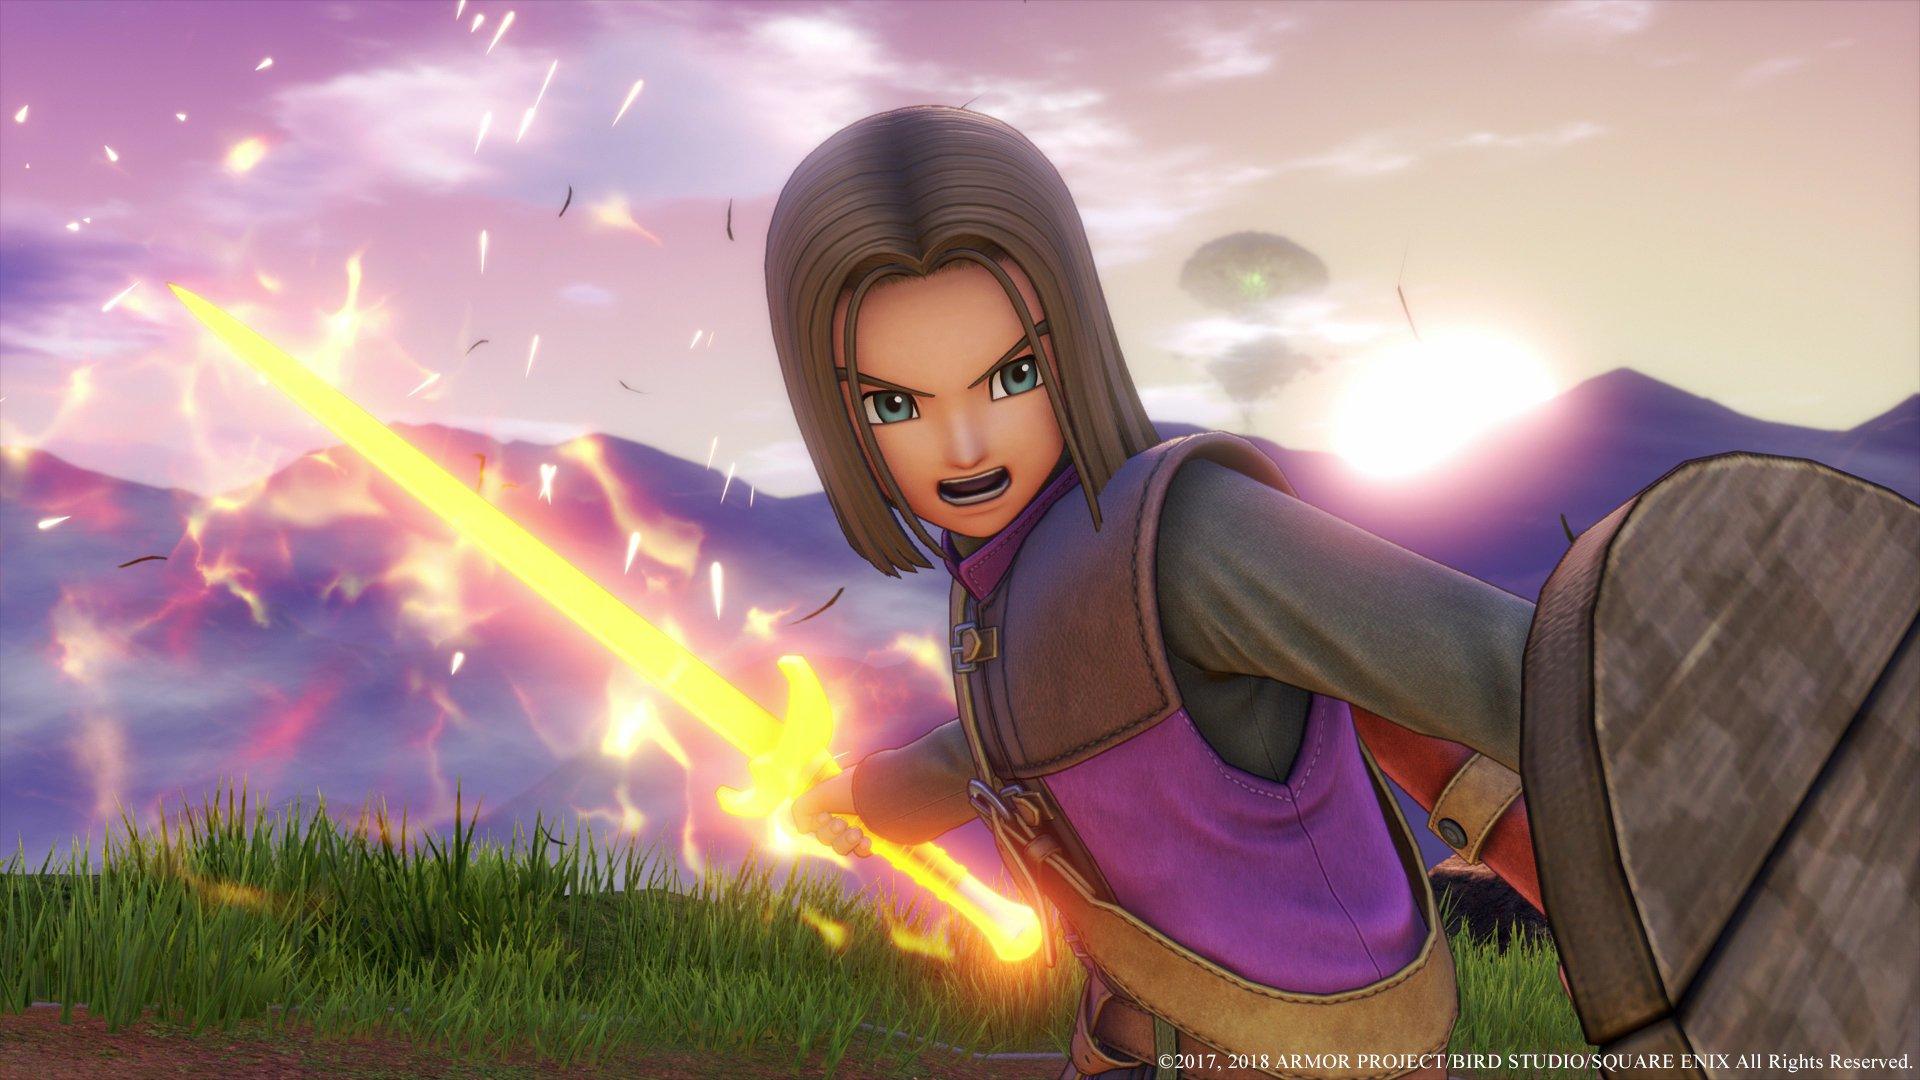 Dragon Quest Xi Echoes Of An Elusive Age Playstation 4